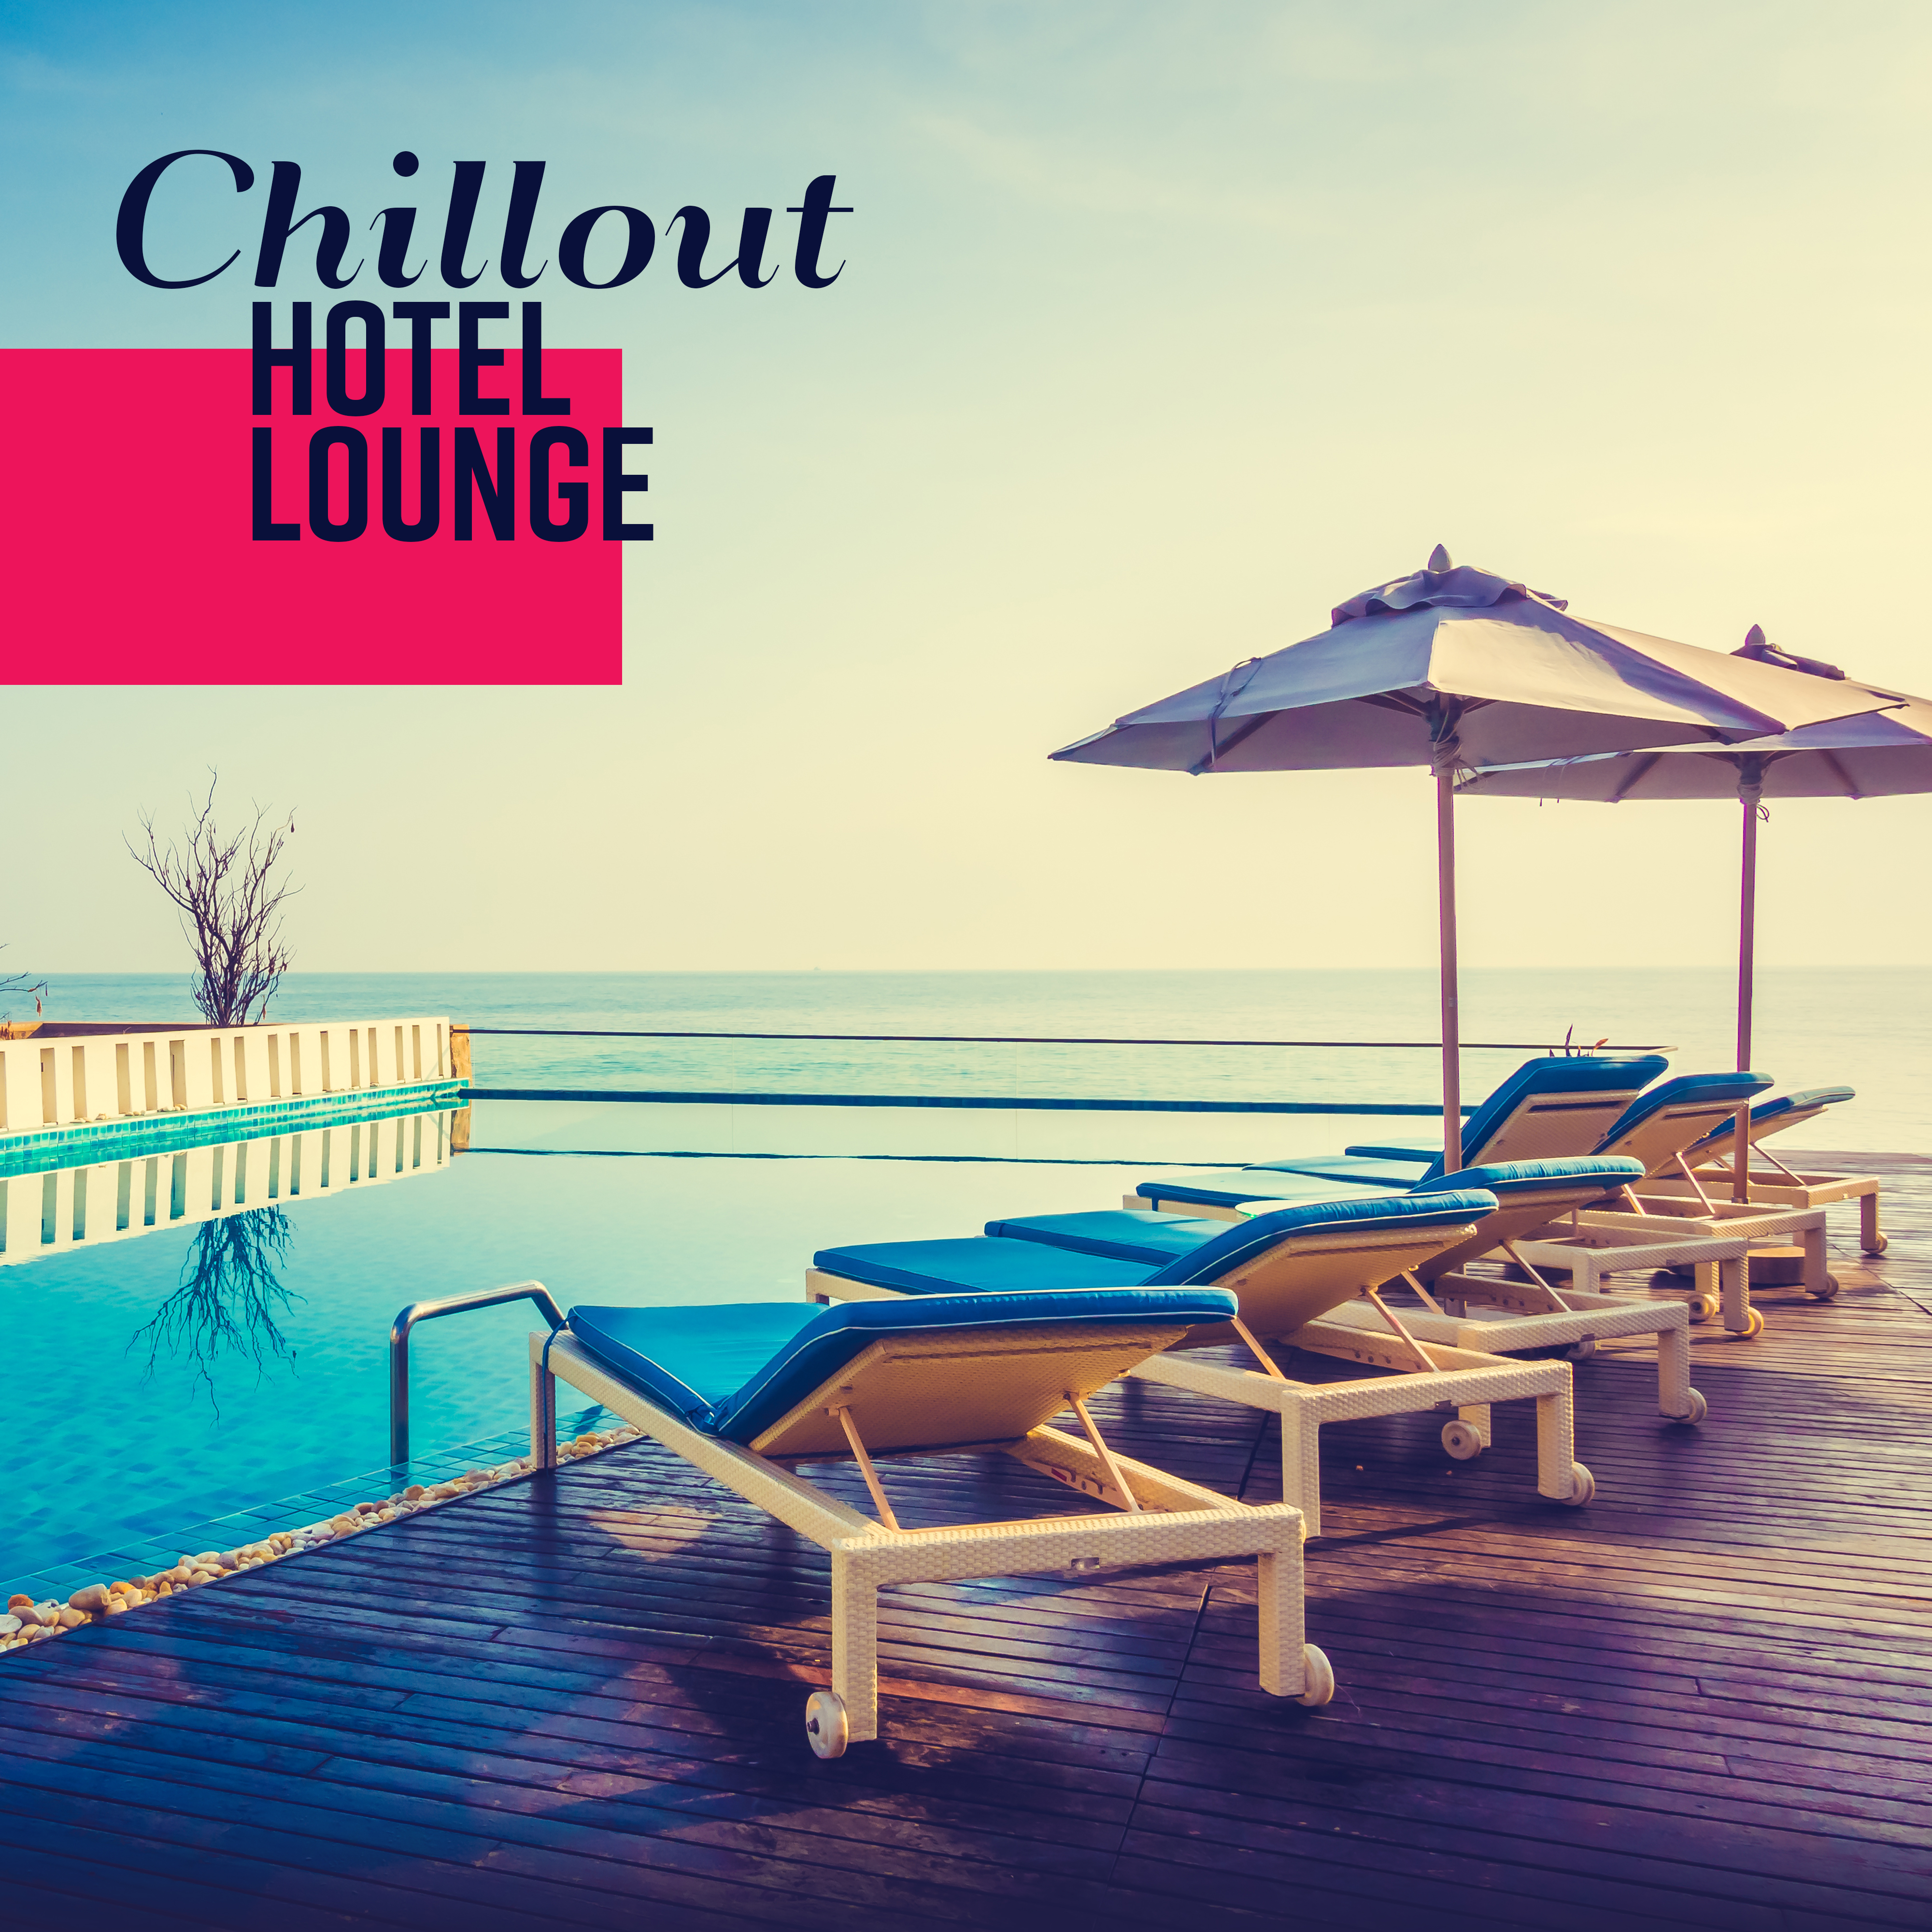 Chillout Hotel Lounge